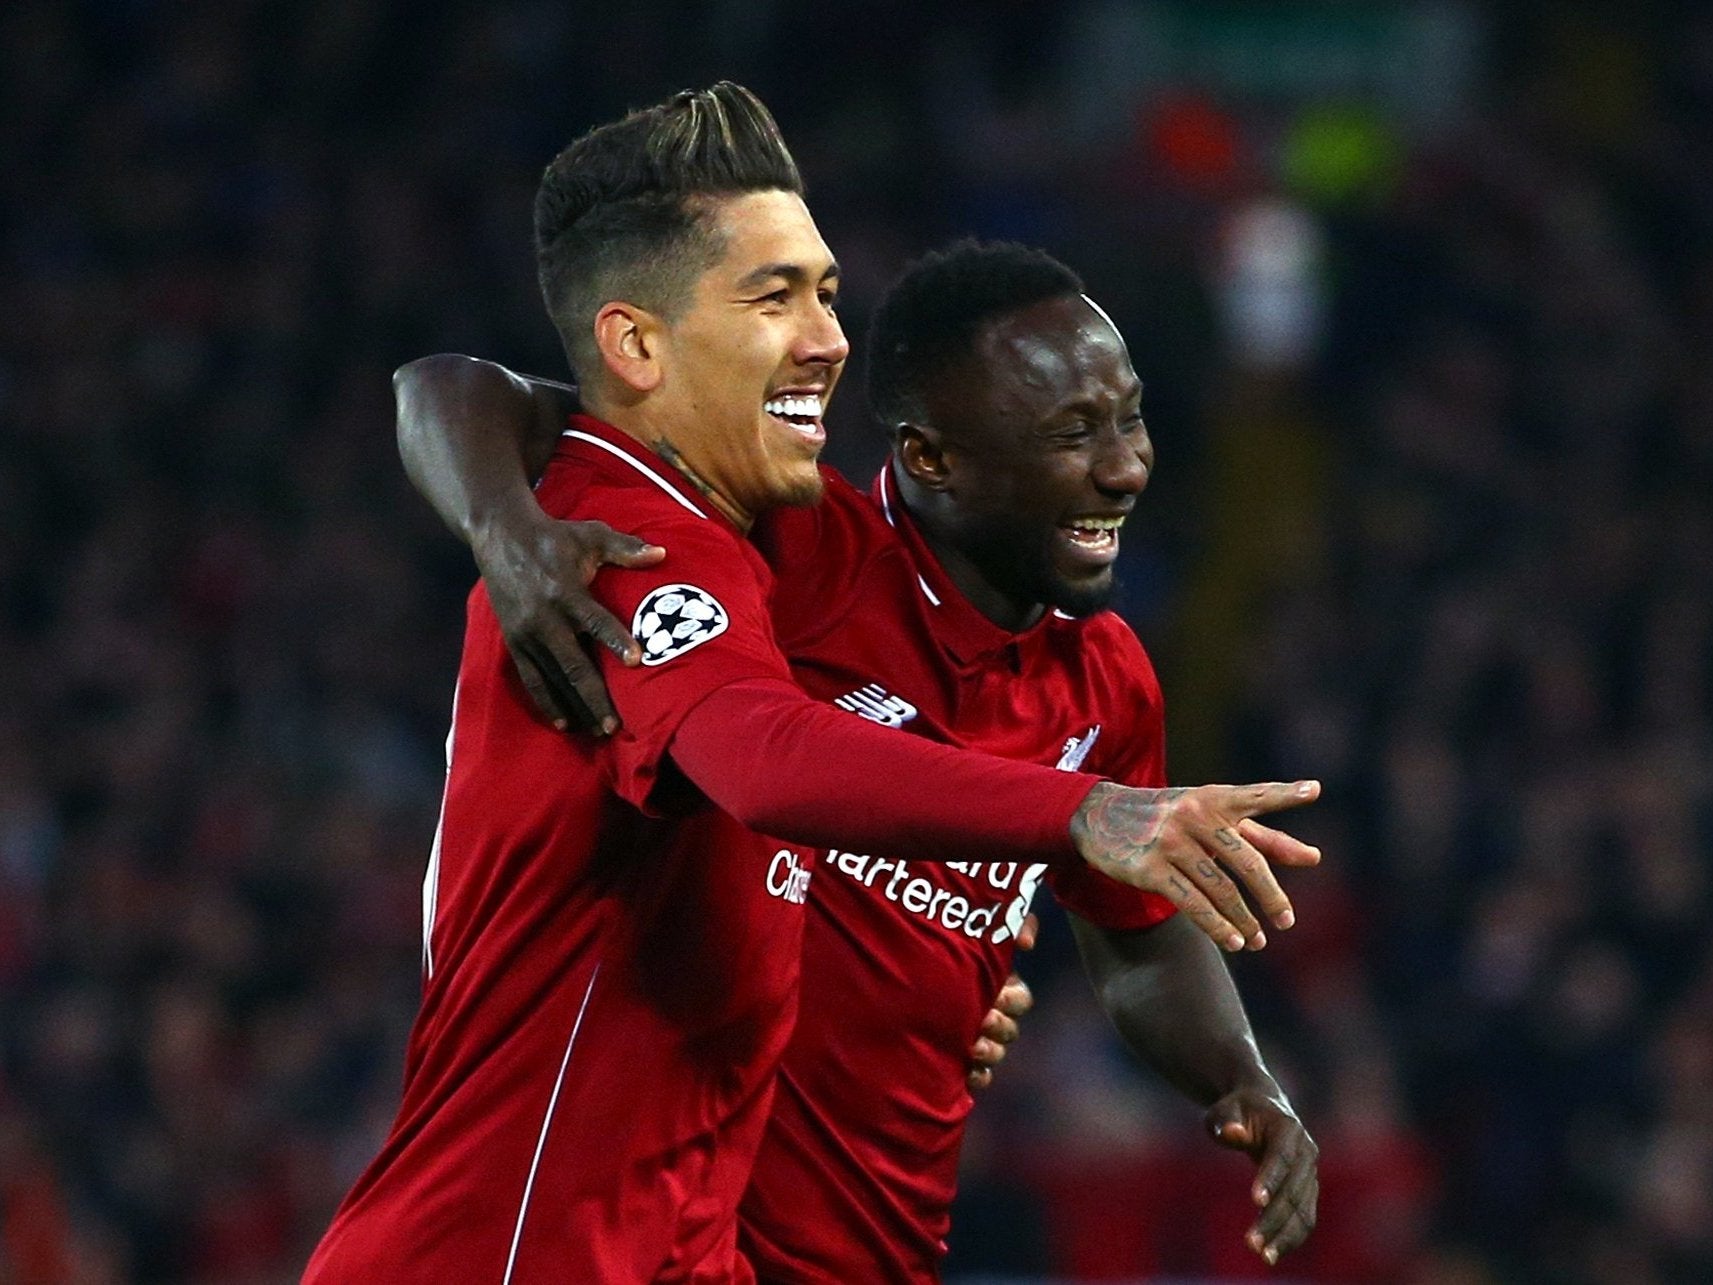 Liverpool vs Porto result: Naby Keita and Roberto Firmino secure Champions League lead - five things we learned